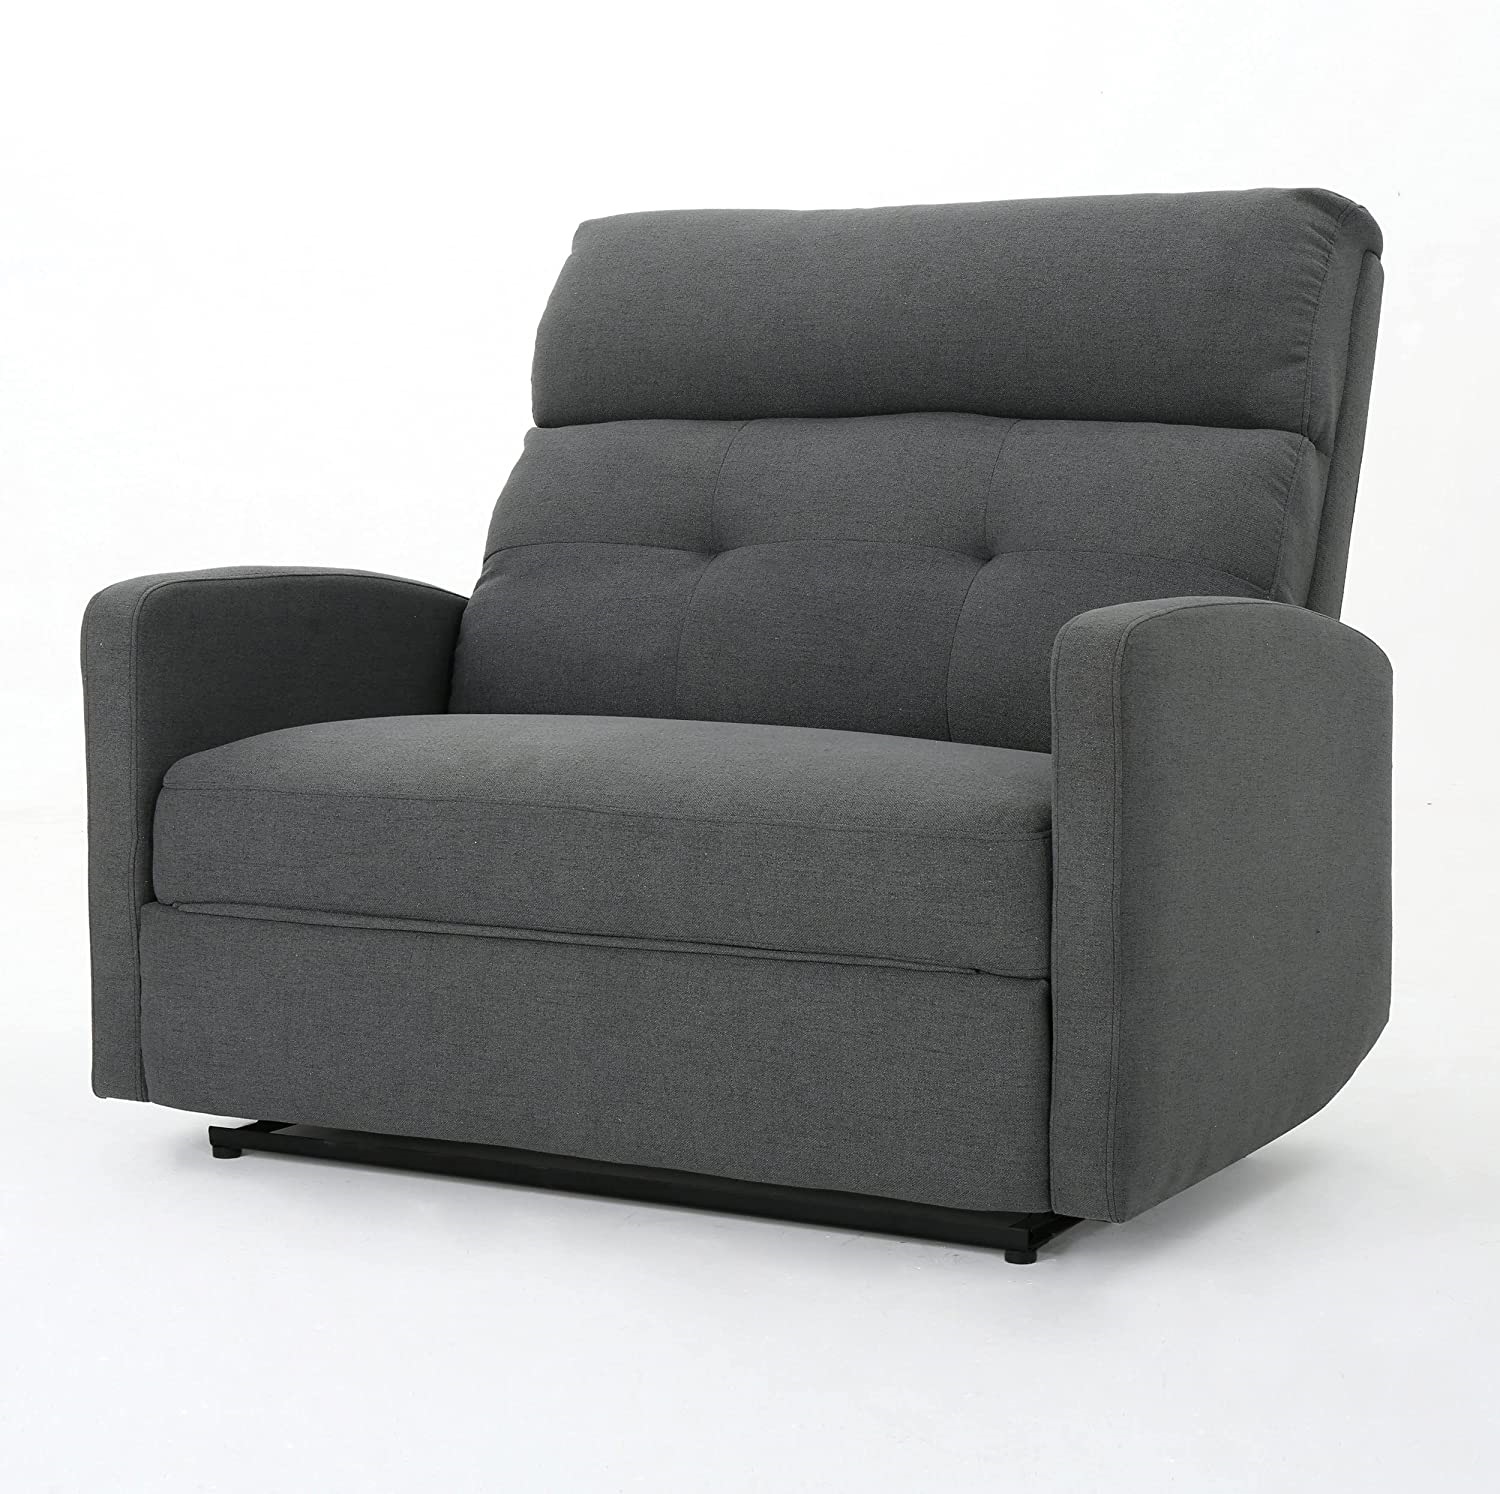 Christopher Knight Home Halima Fabric 2-Seater Recliner